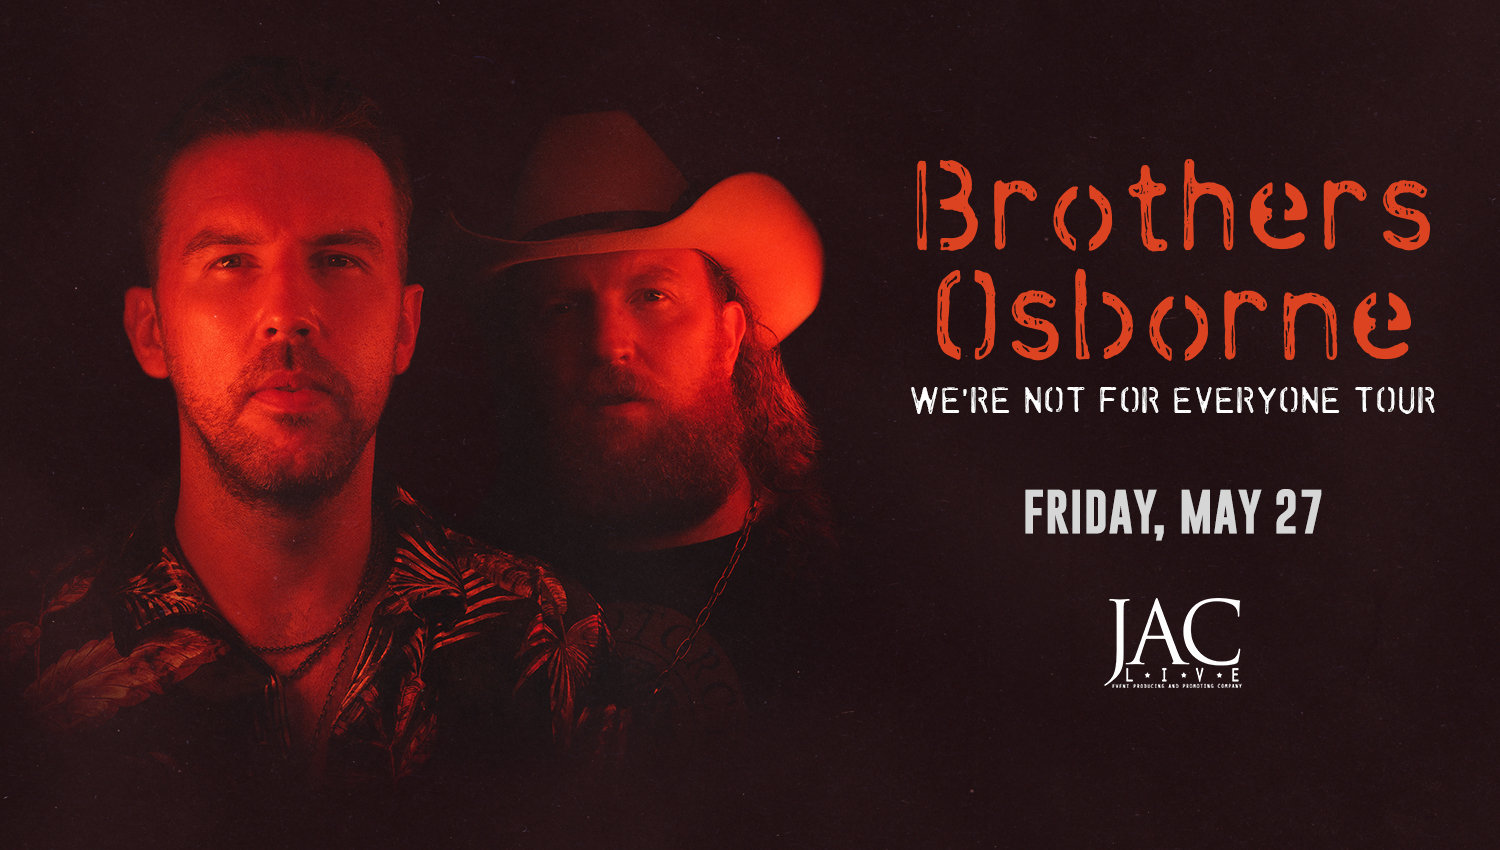 Brothers Osborne – We’re Not For Everyone Tour.